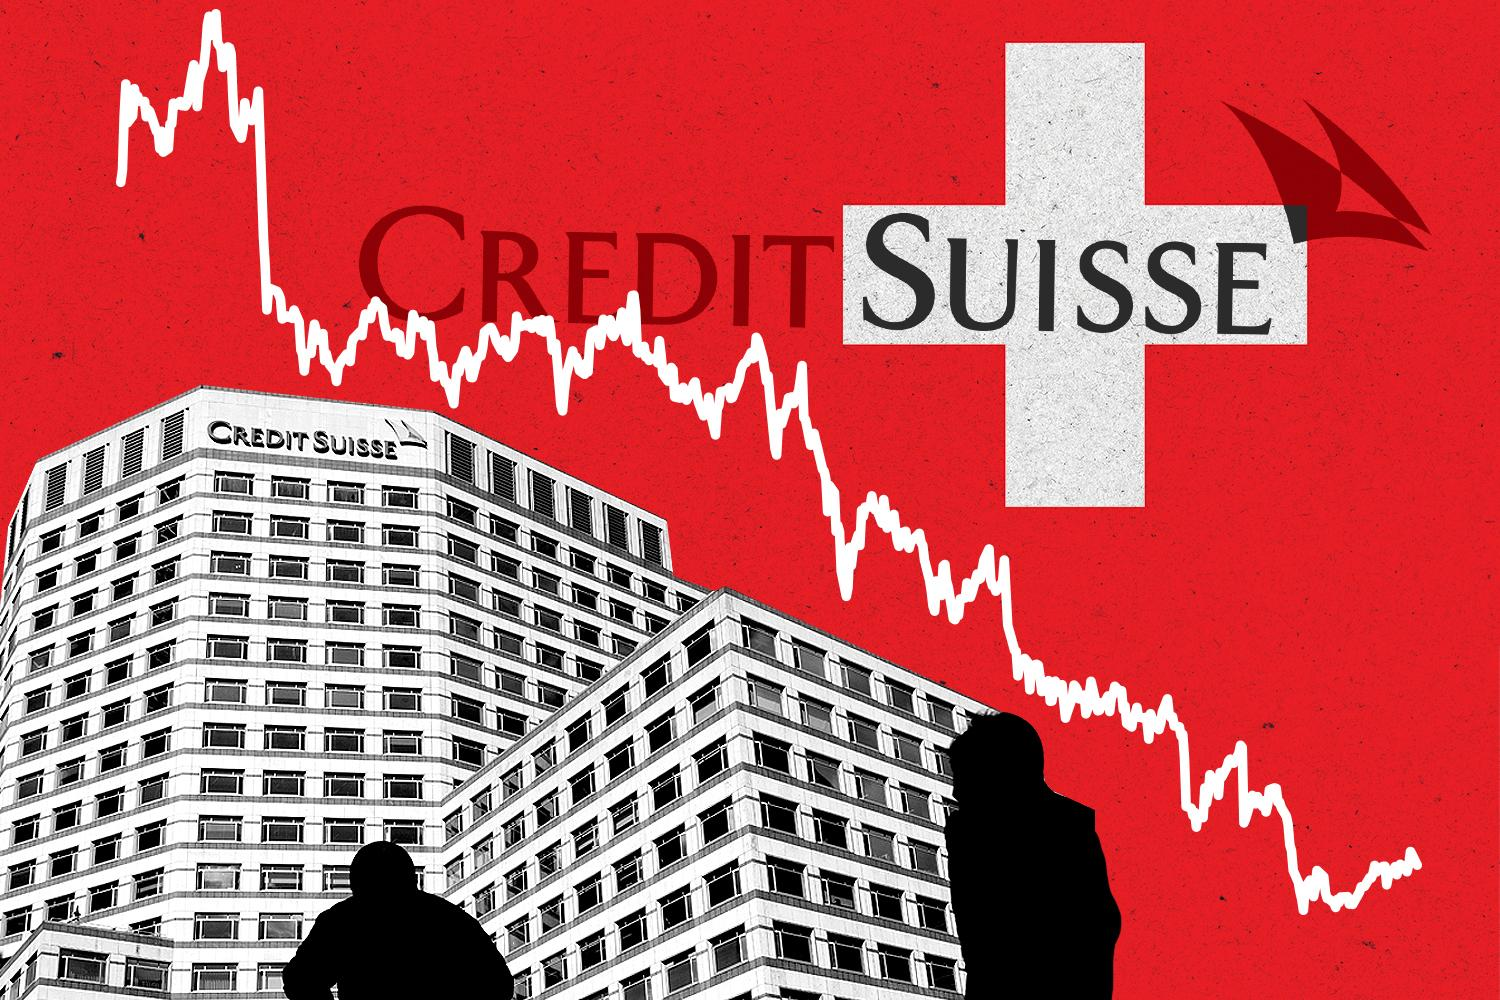 Swiss Government Debates On Credit Suisse'S Future